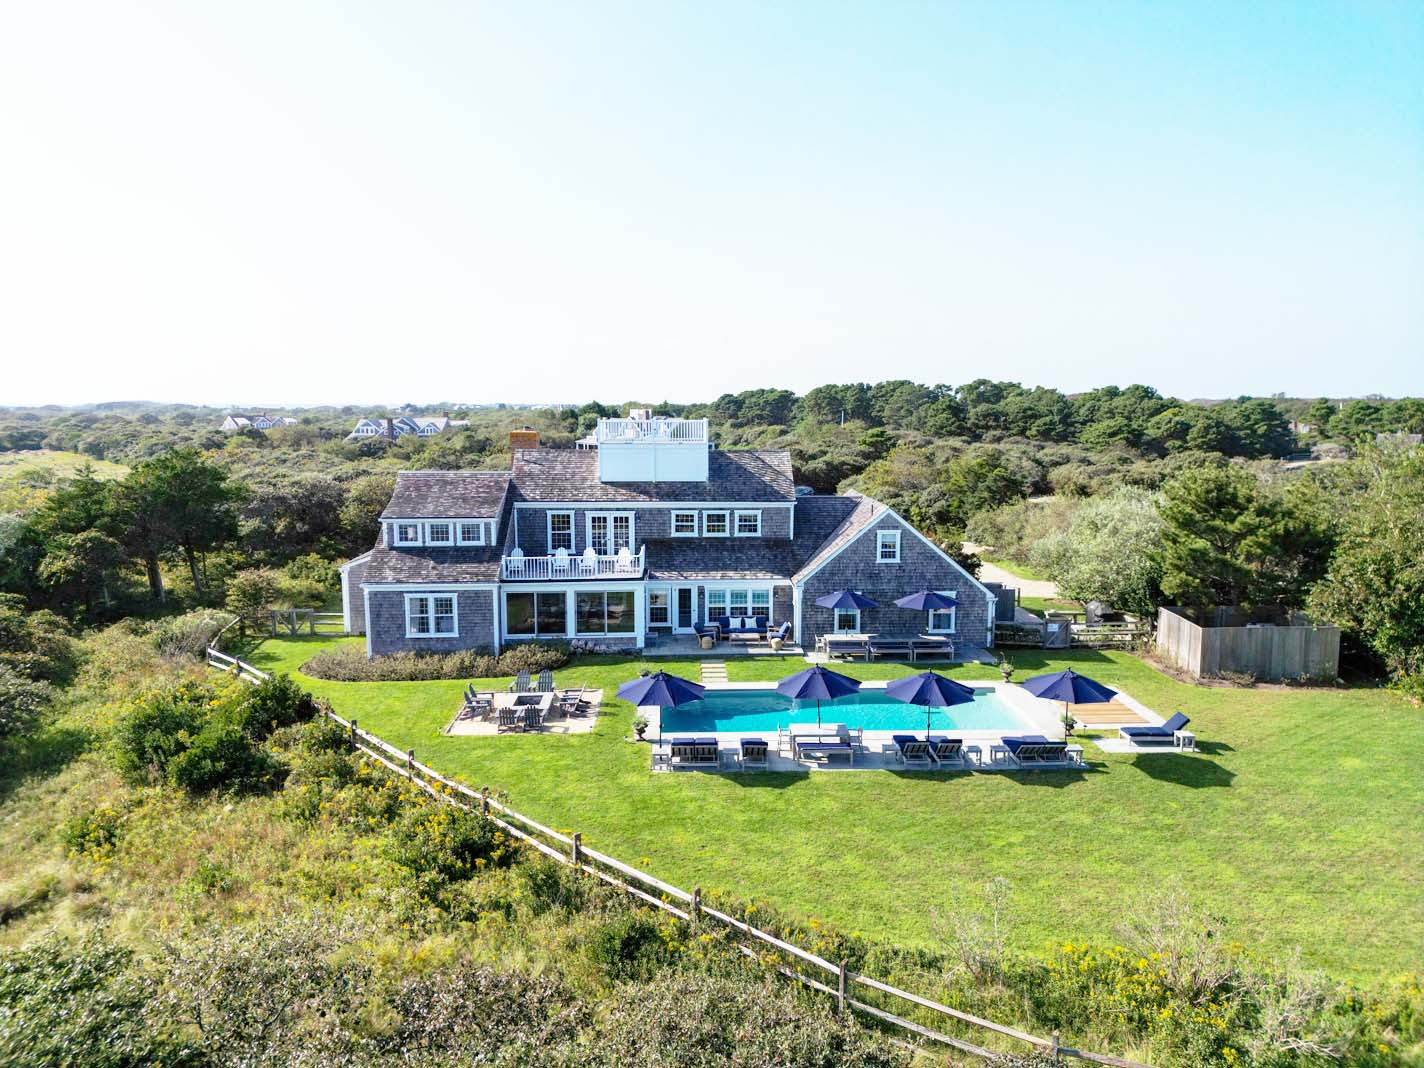 6-21 Quidnet Rd Nantucket Family Compound Tennis Pool Pickleball